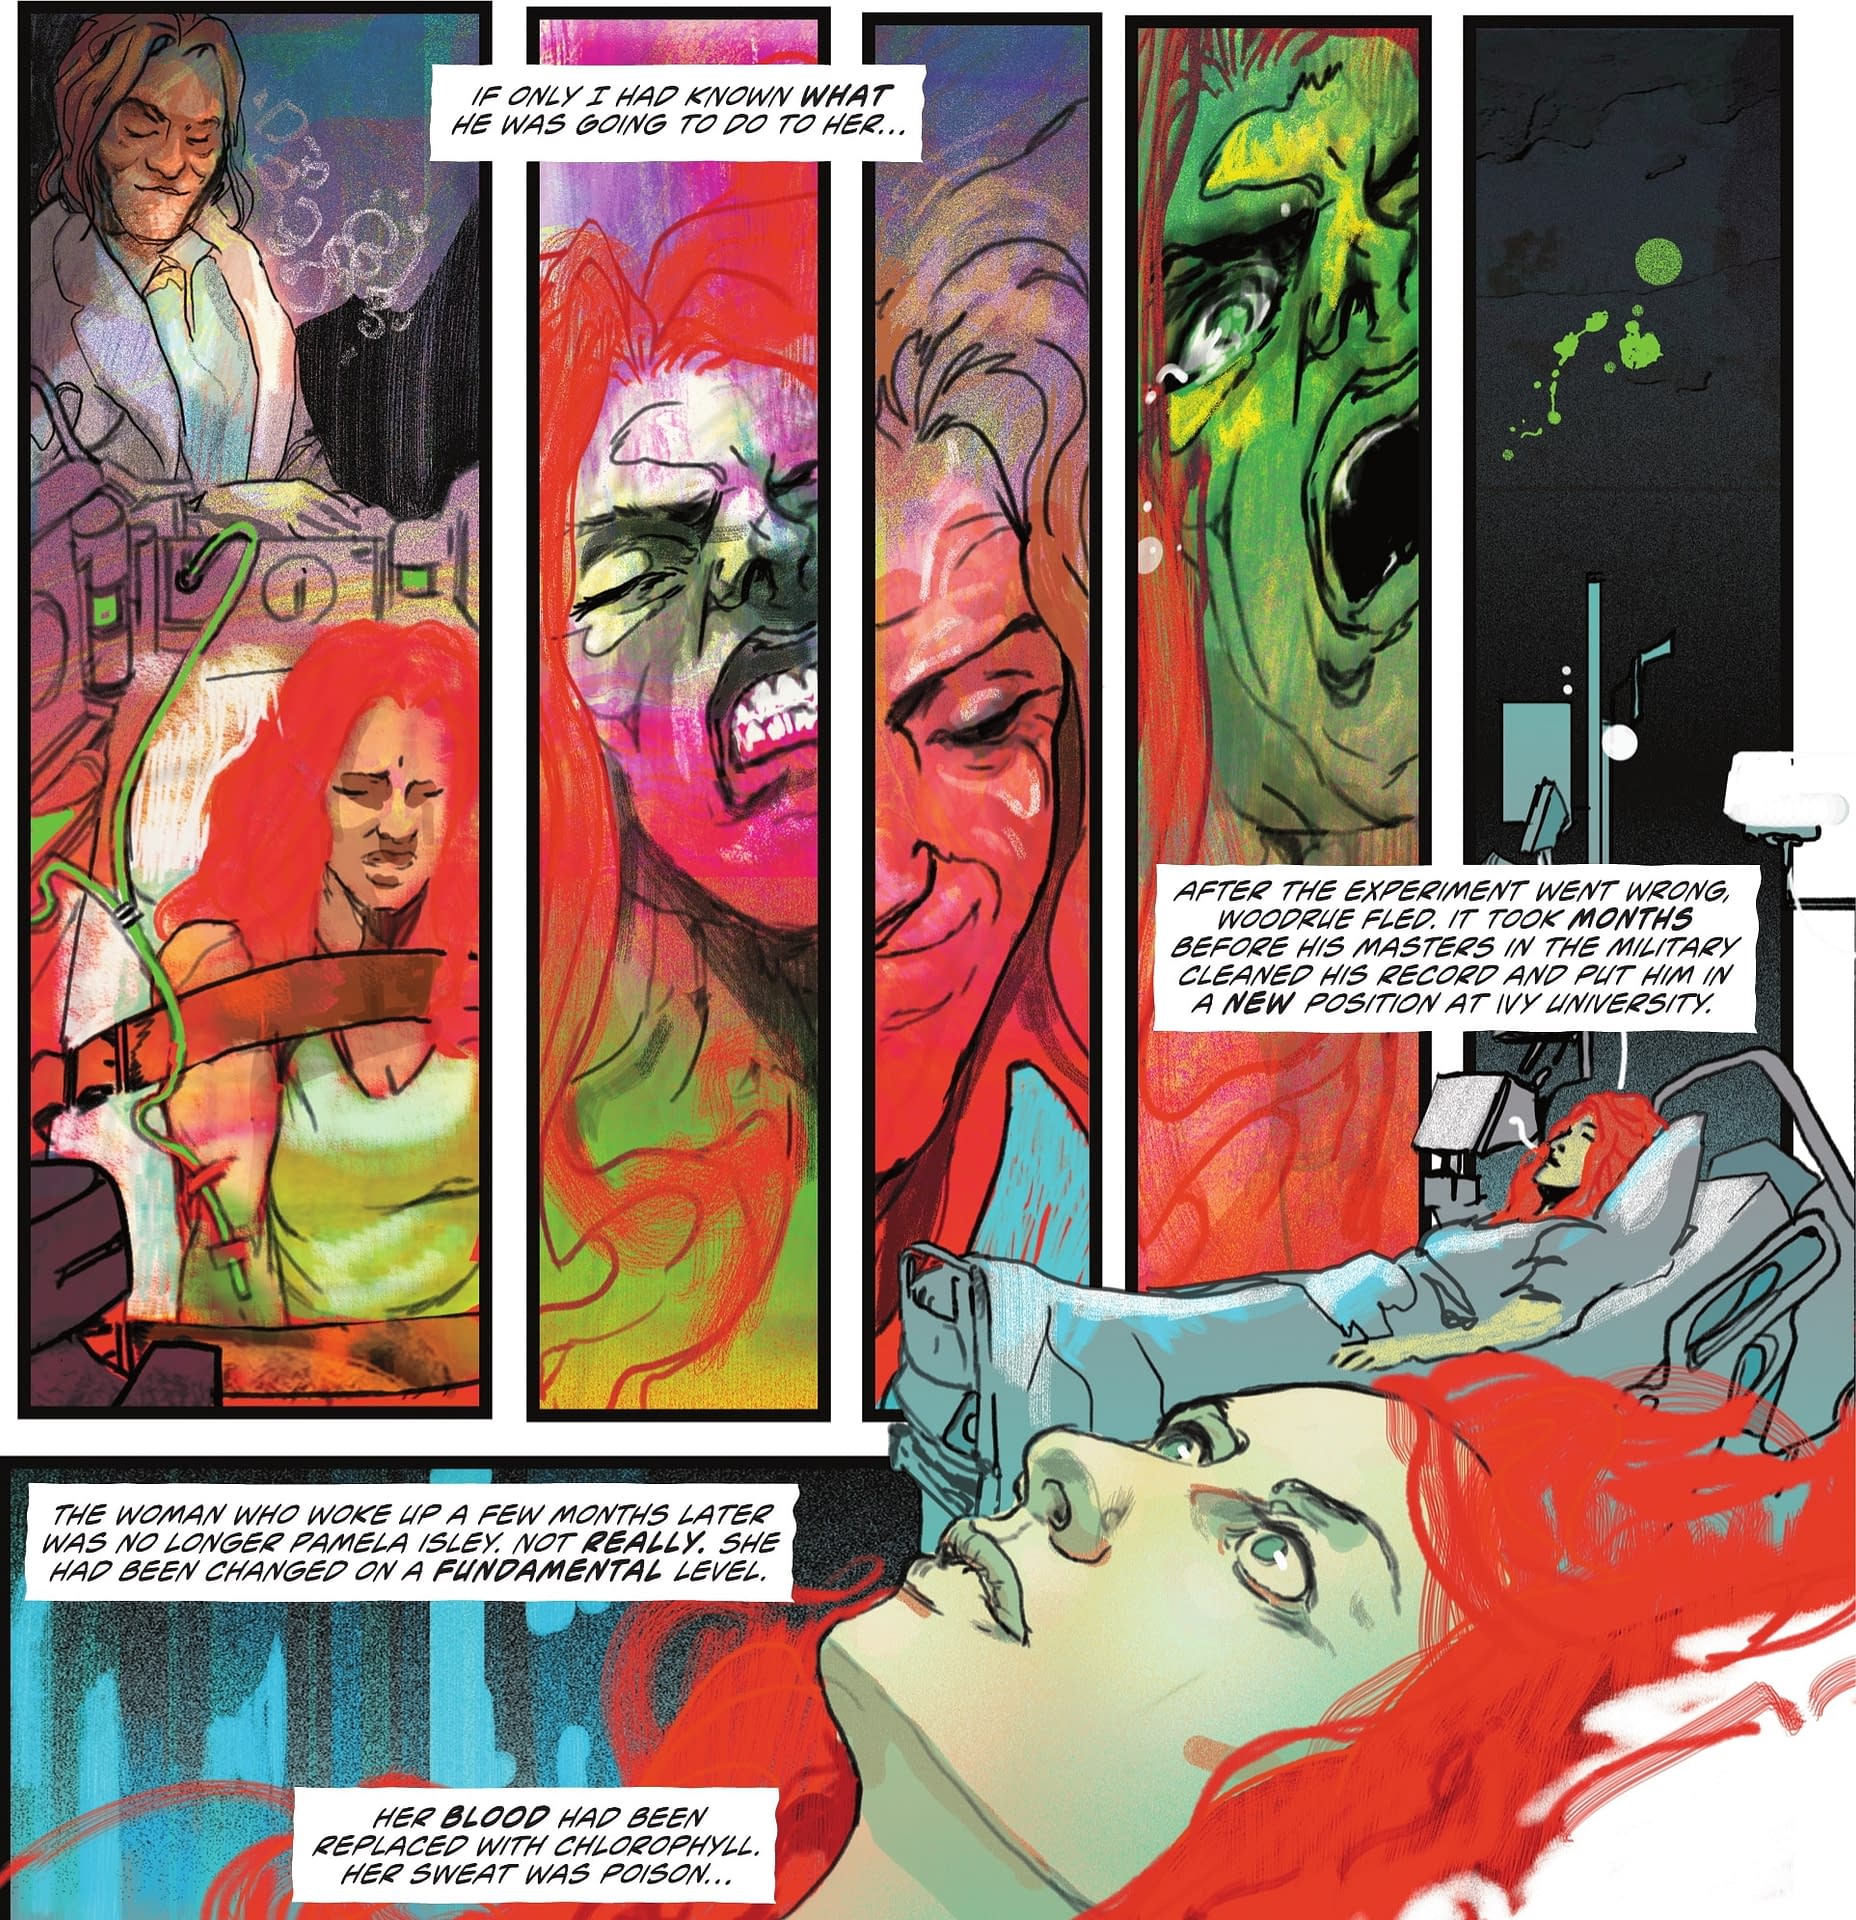 Poison Ivy Gets A Redefined Origin And A New Future Today (Spoilers)